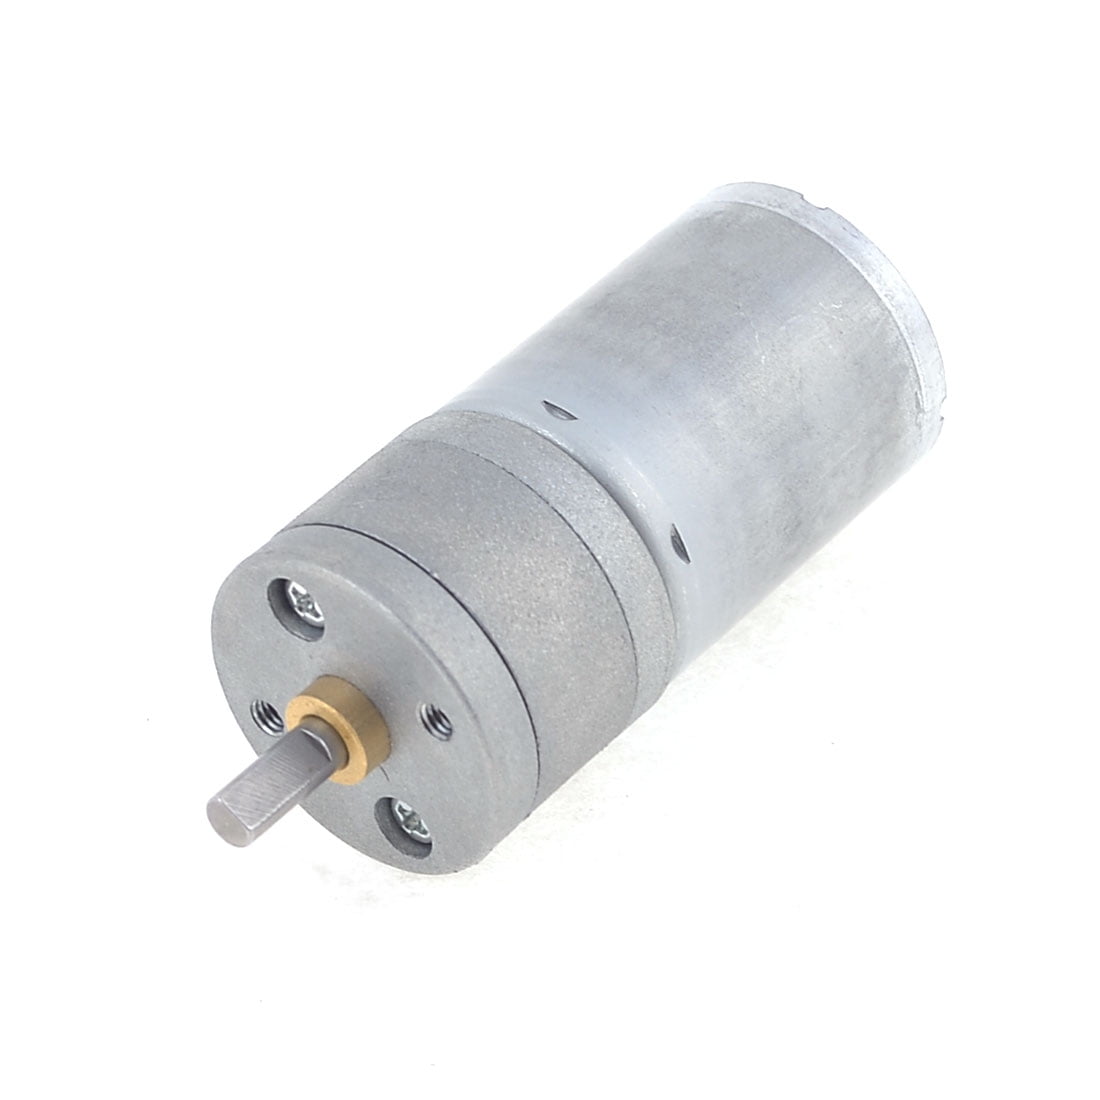 1 pc 12V 500RPM Output Speed 4mm Shaft Dia DC Gearbox Geared Motor 